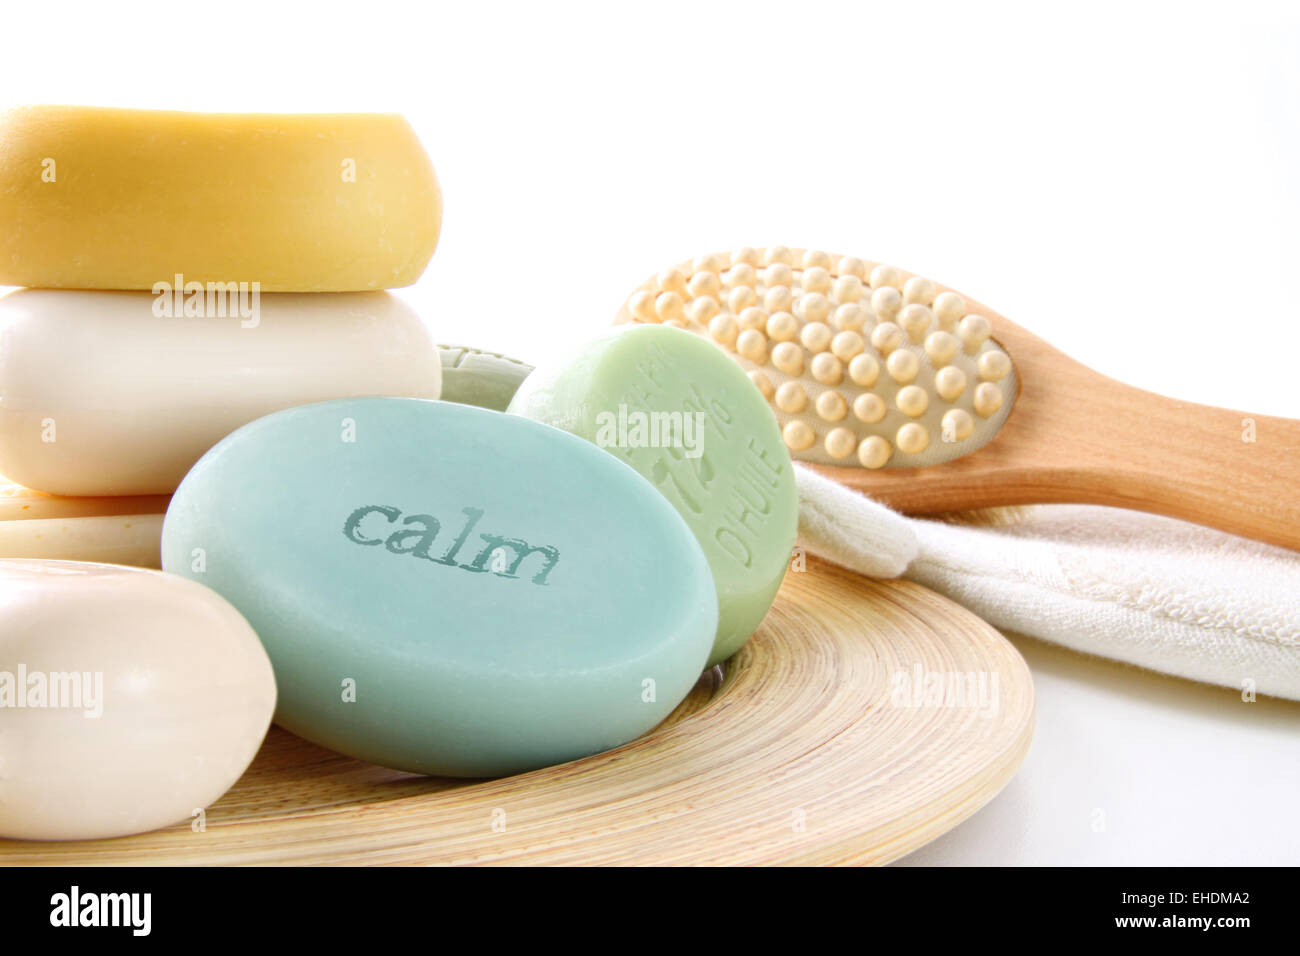 Assortment of colored scented soaps Stock Photo